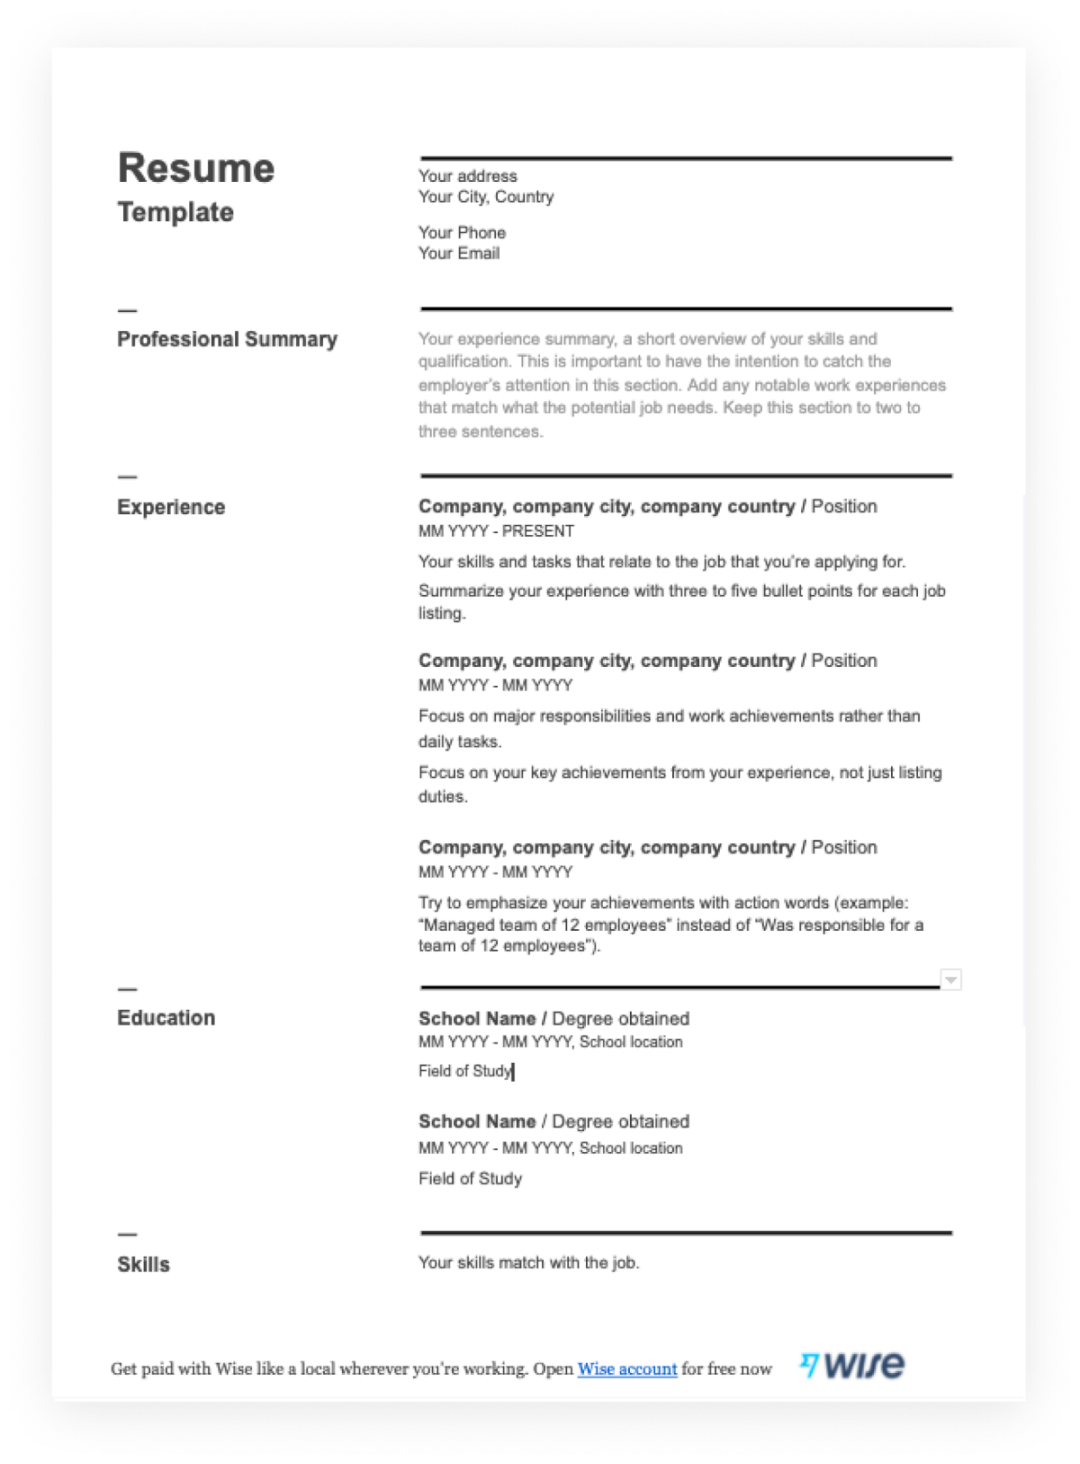 resume templates in pdf free for download wise